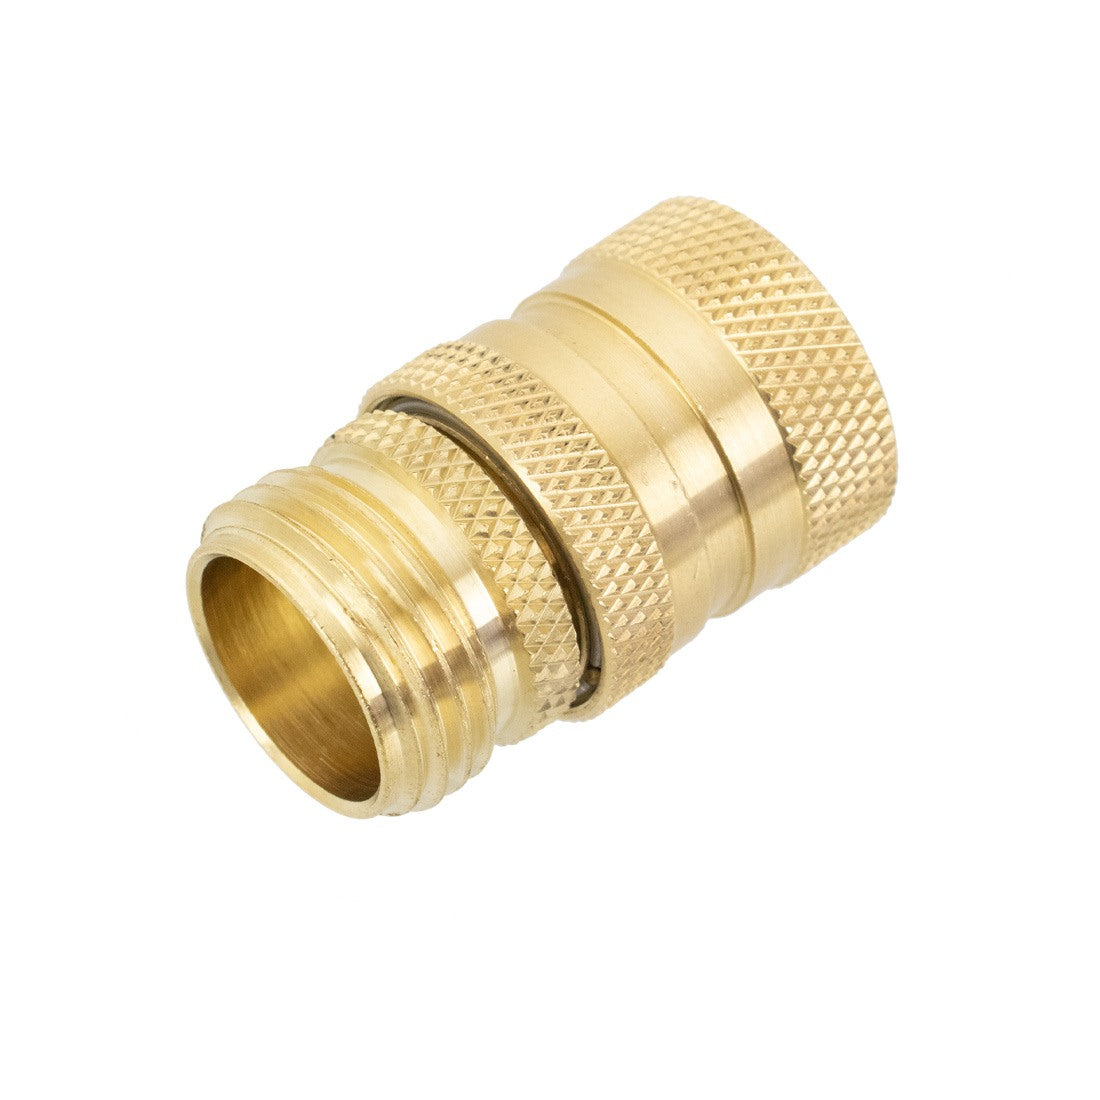 Garden Hose Quick Connect Male and Female Set - Brass - Assembled Tilted Right Bottom Angle View